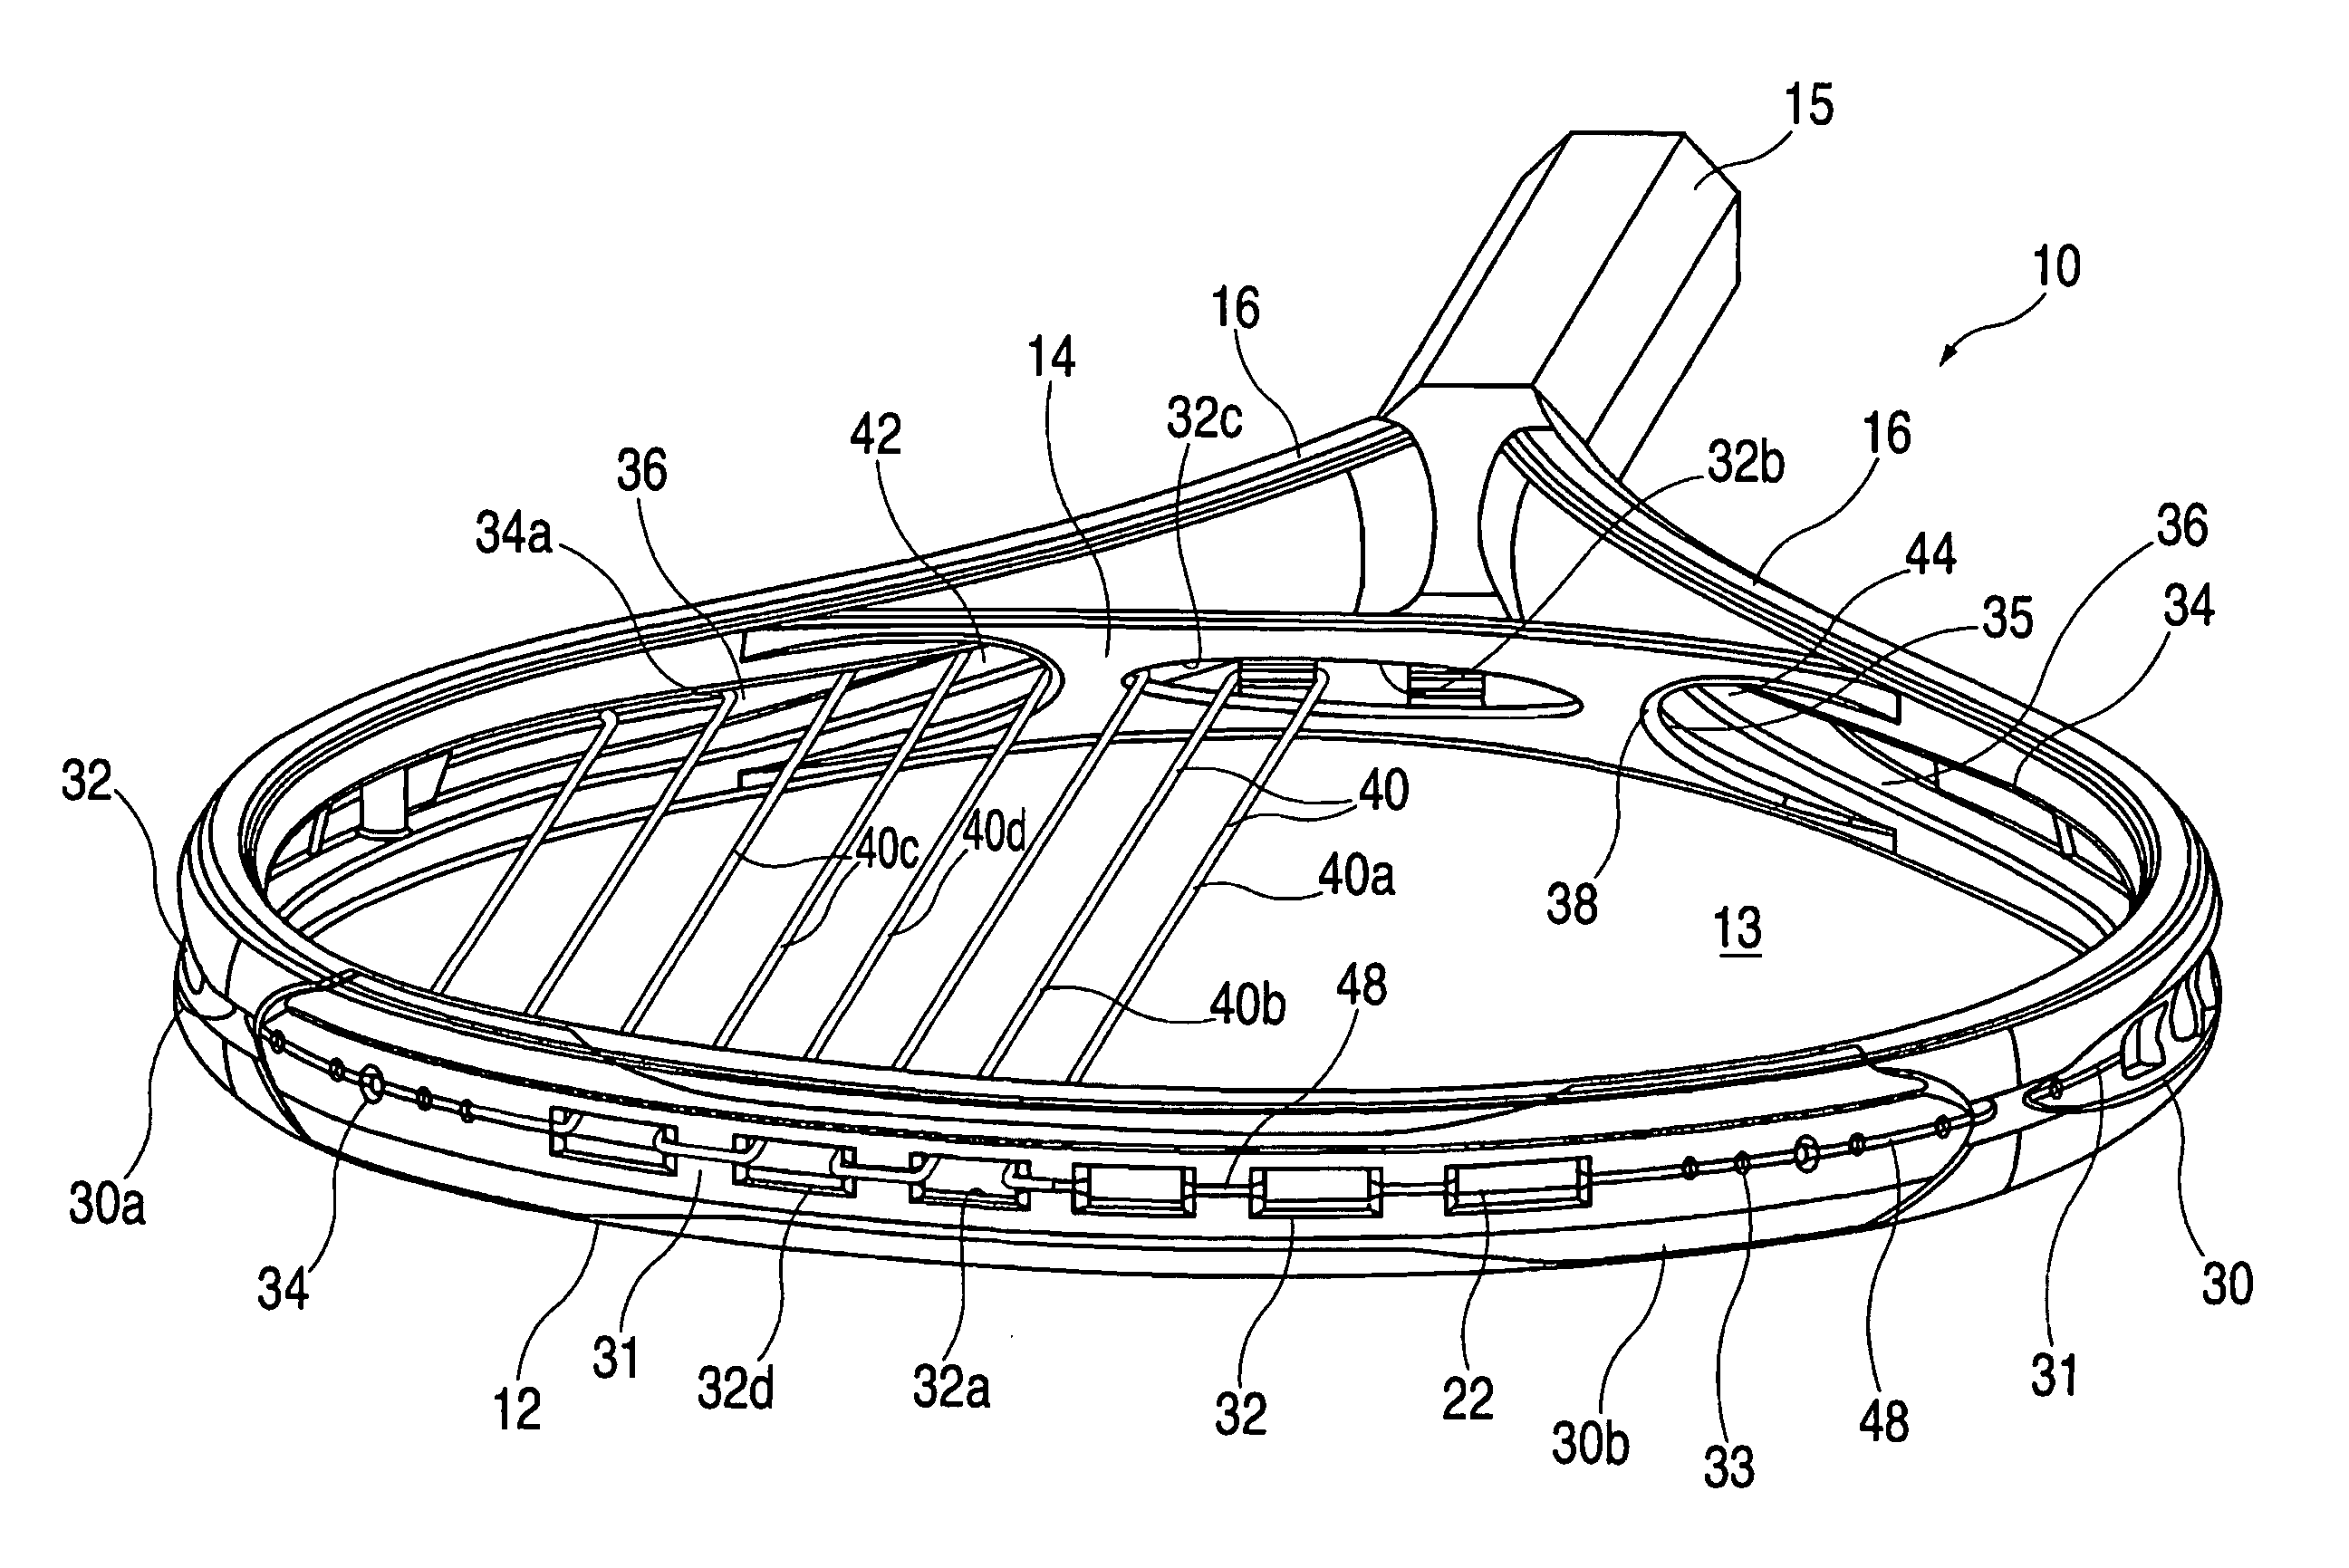 Sports racquet with insert members for anchoring strings